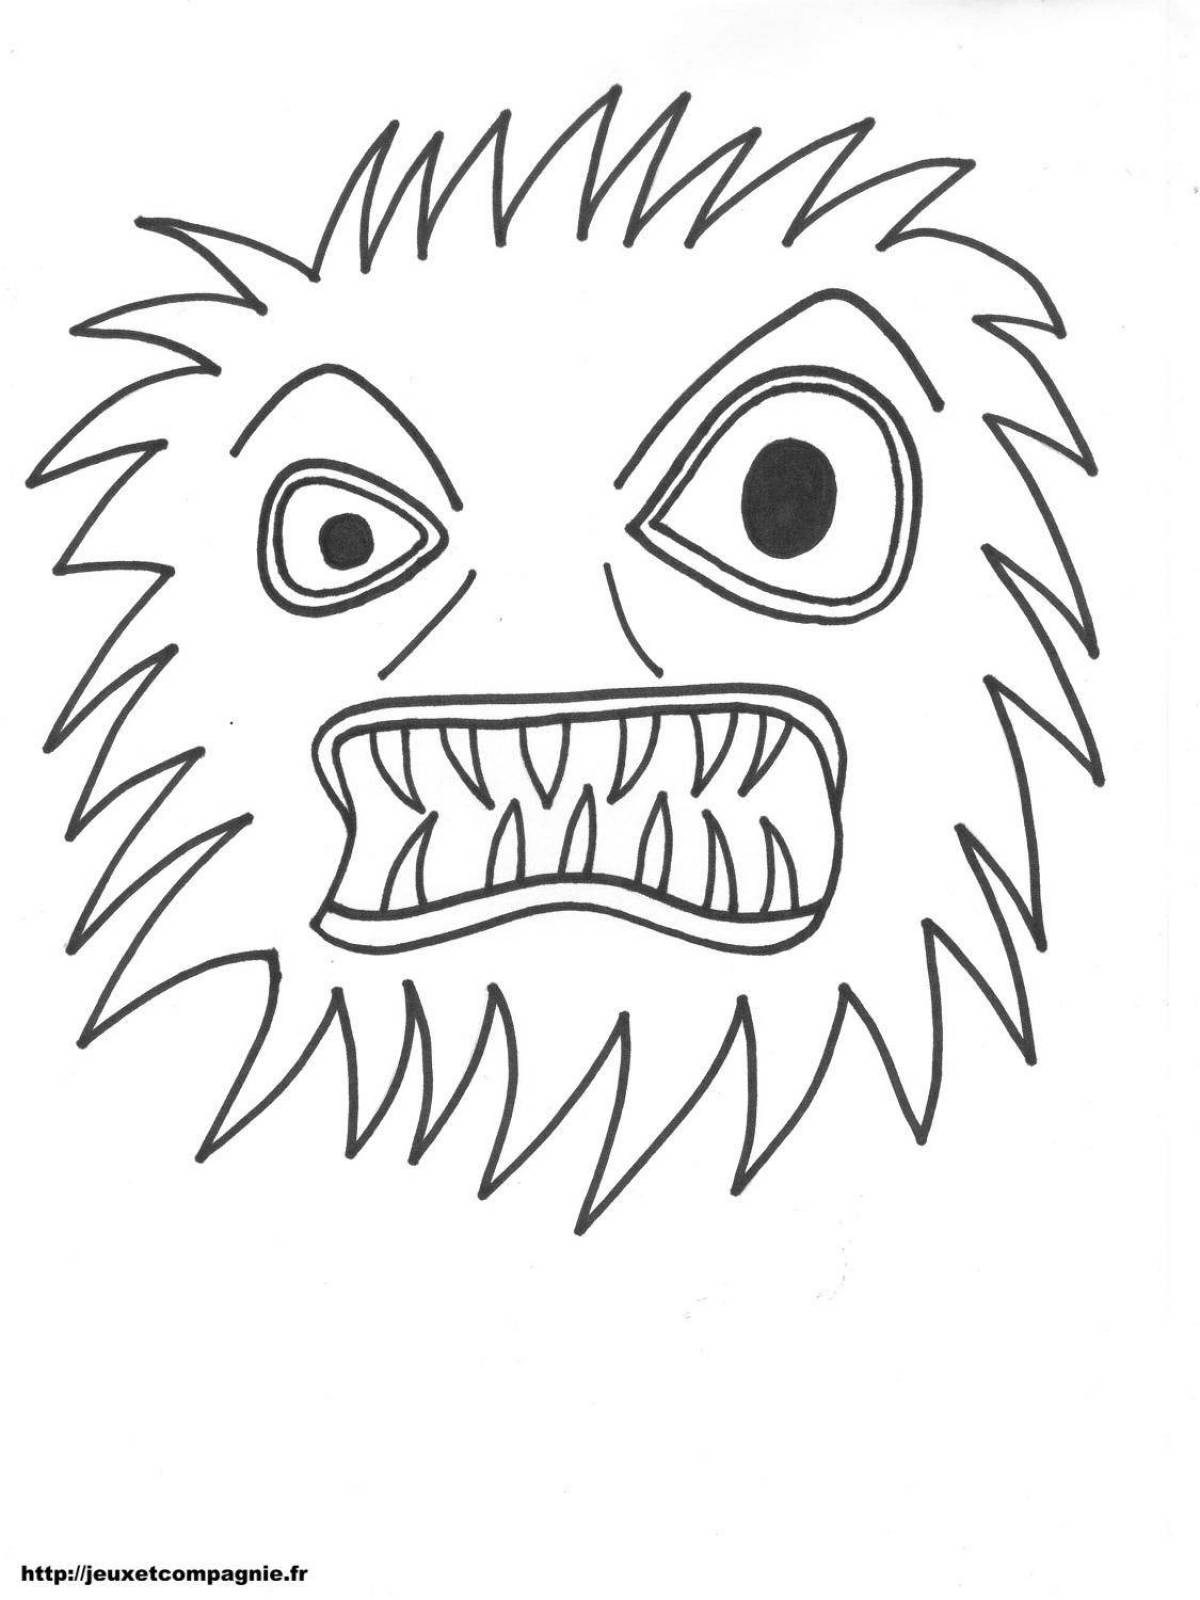 Coloring page friendly blue monster